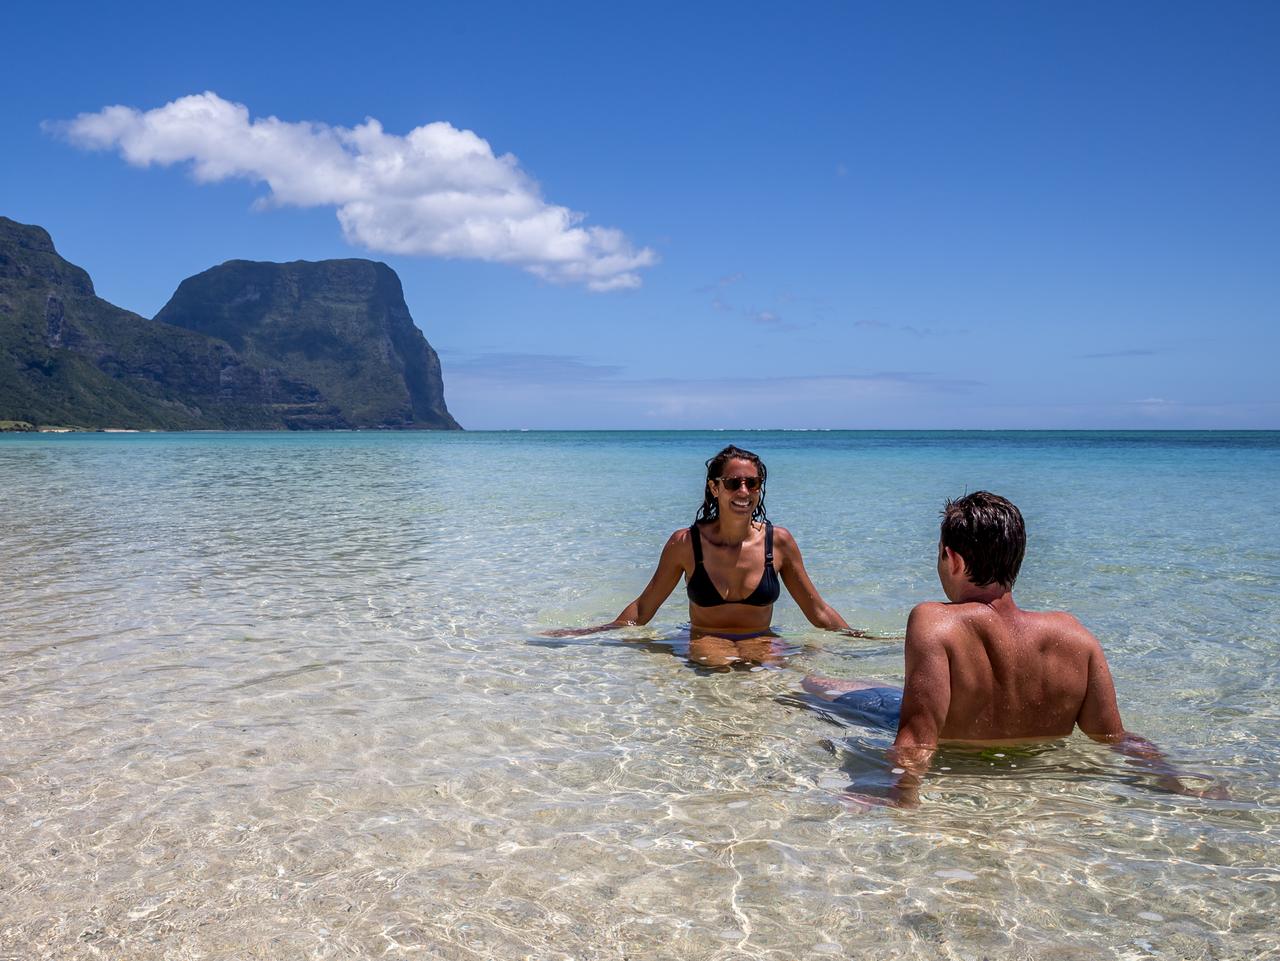 Pinetrees Lodge is found on the spectacular Lord Howe Island.